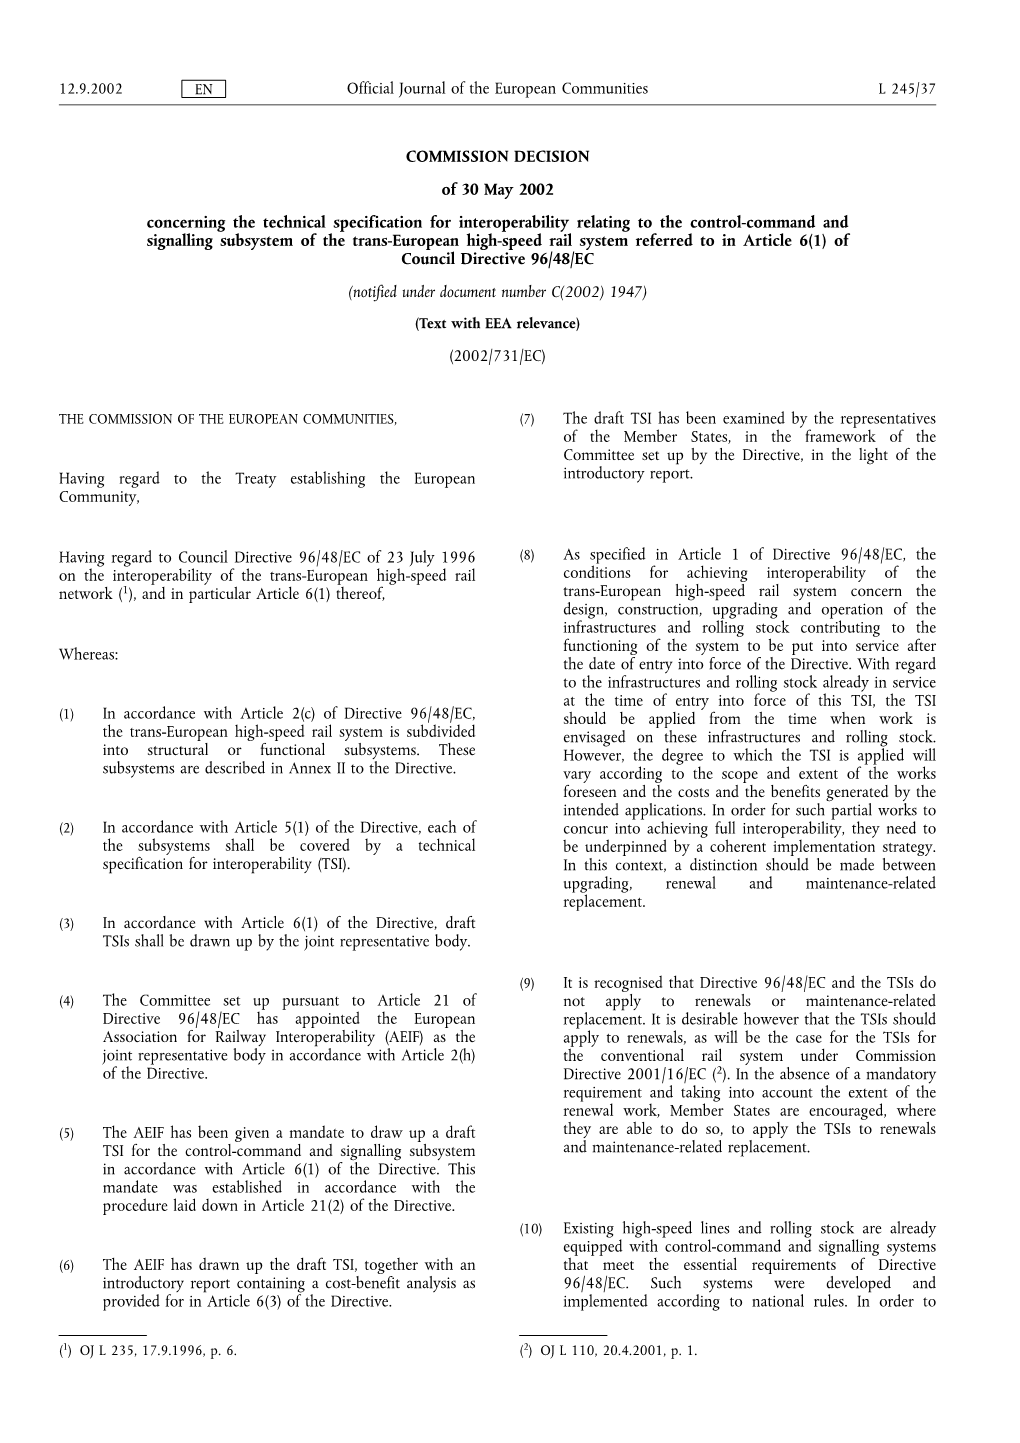 COMMISSION DECISION of 30 May 2002 Concerning the Technical